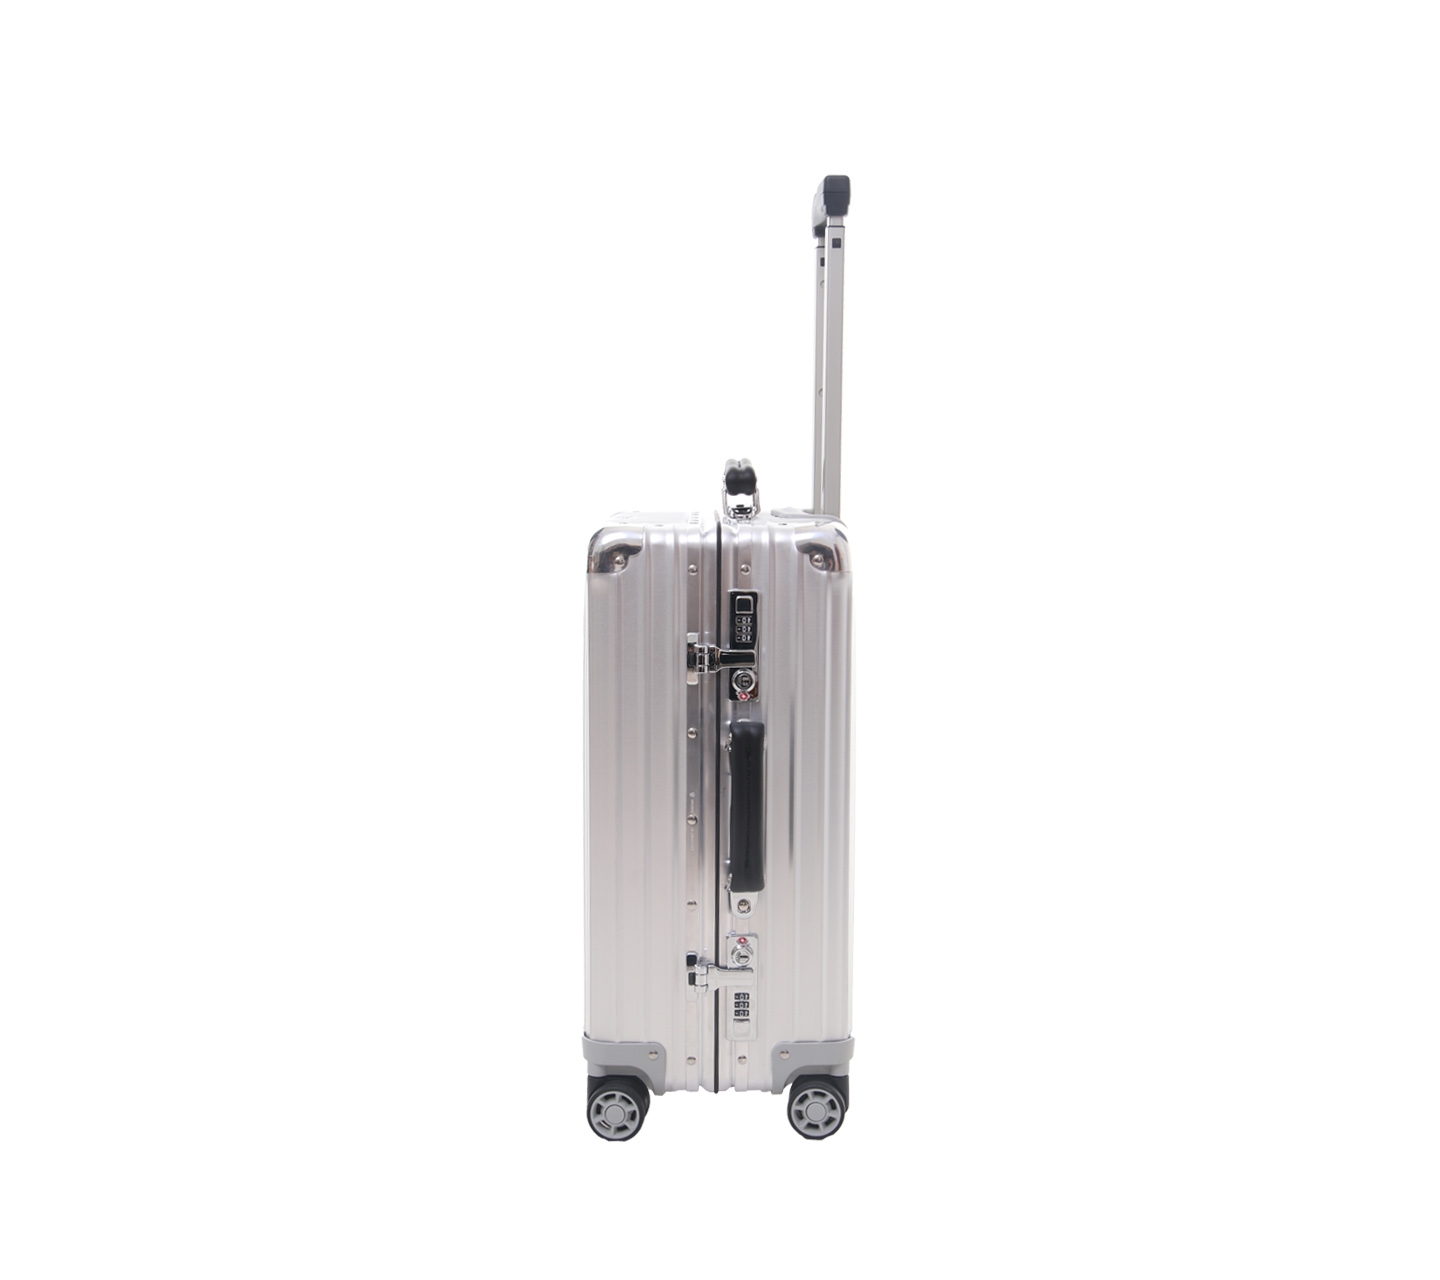 Rimowa Silver Luggage And Travel